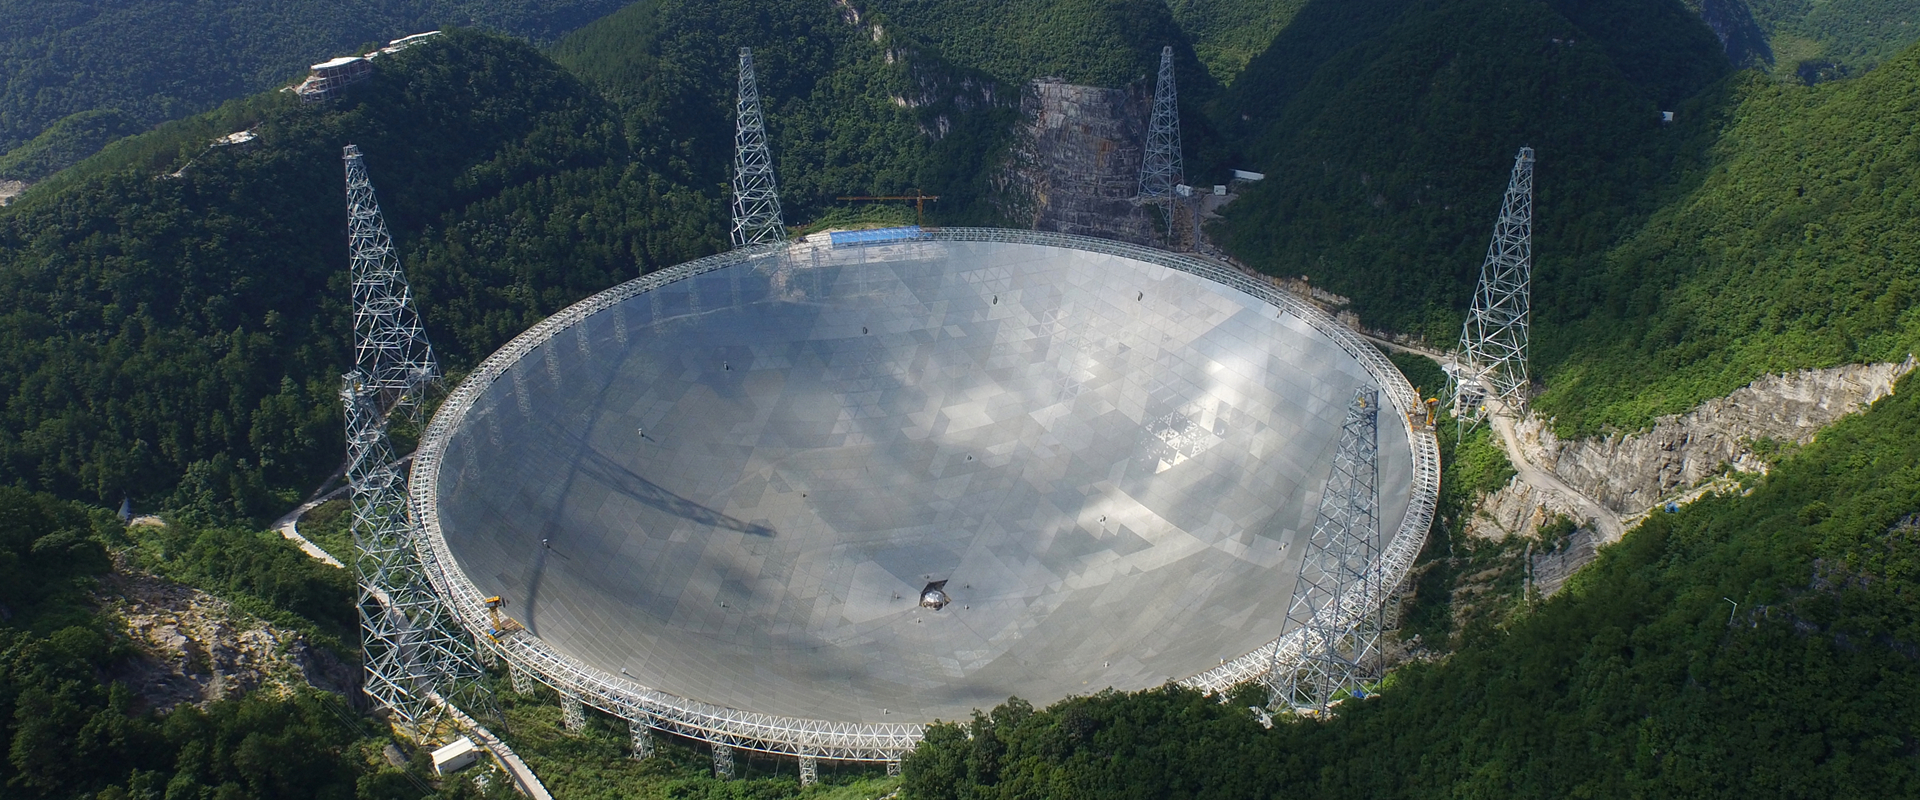 World's Most Sensitive Radio Telescope Concludes 15-month Listening Session, Accepting International Proposals